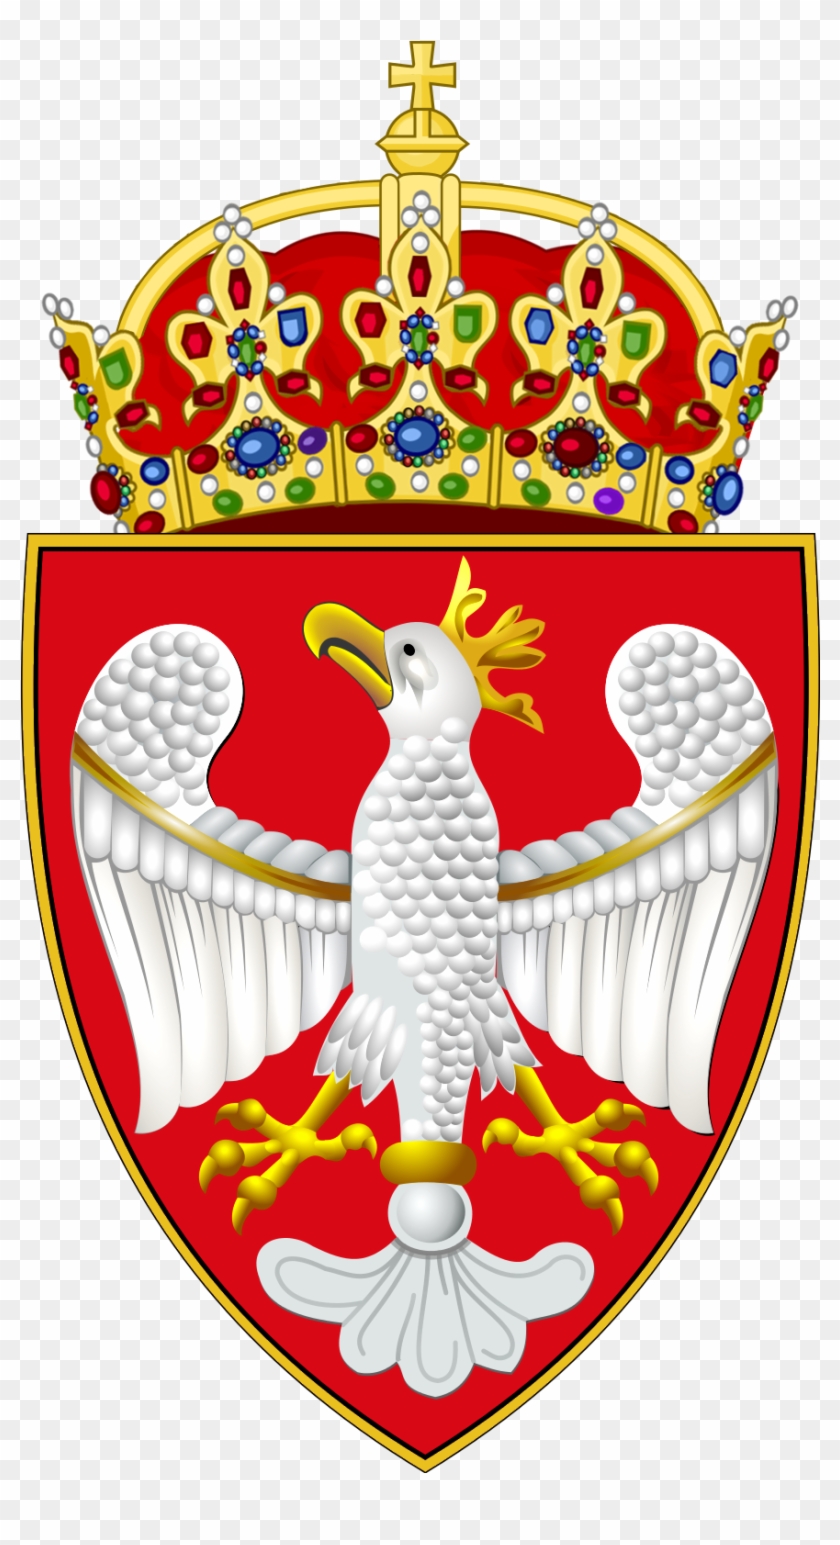 Coat Of Arms Of Kingdom Of Poland - Medieval Polish Coat Of Arms Clipart #4406301